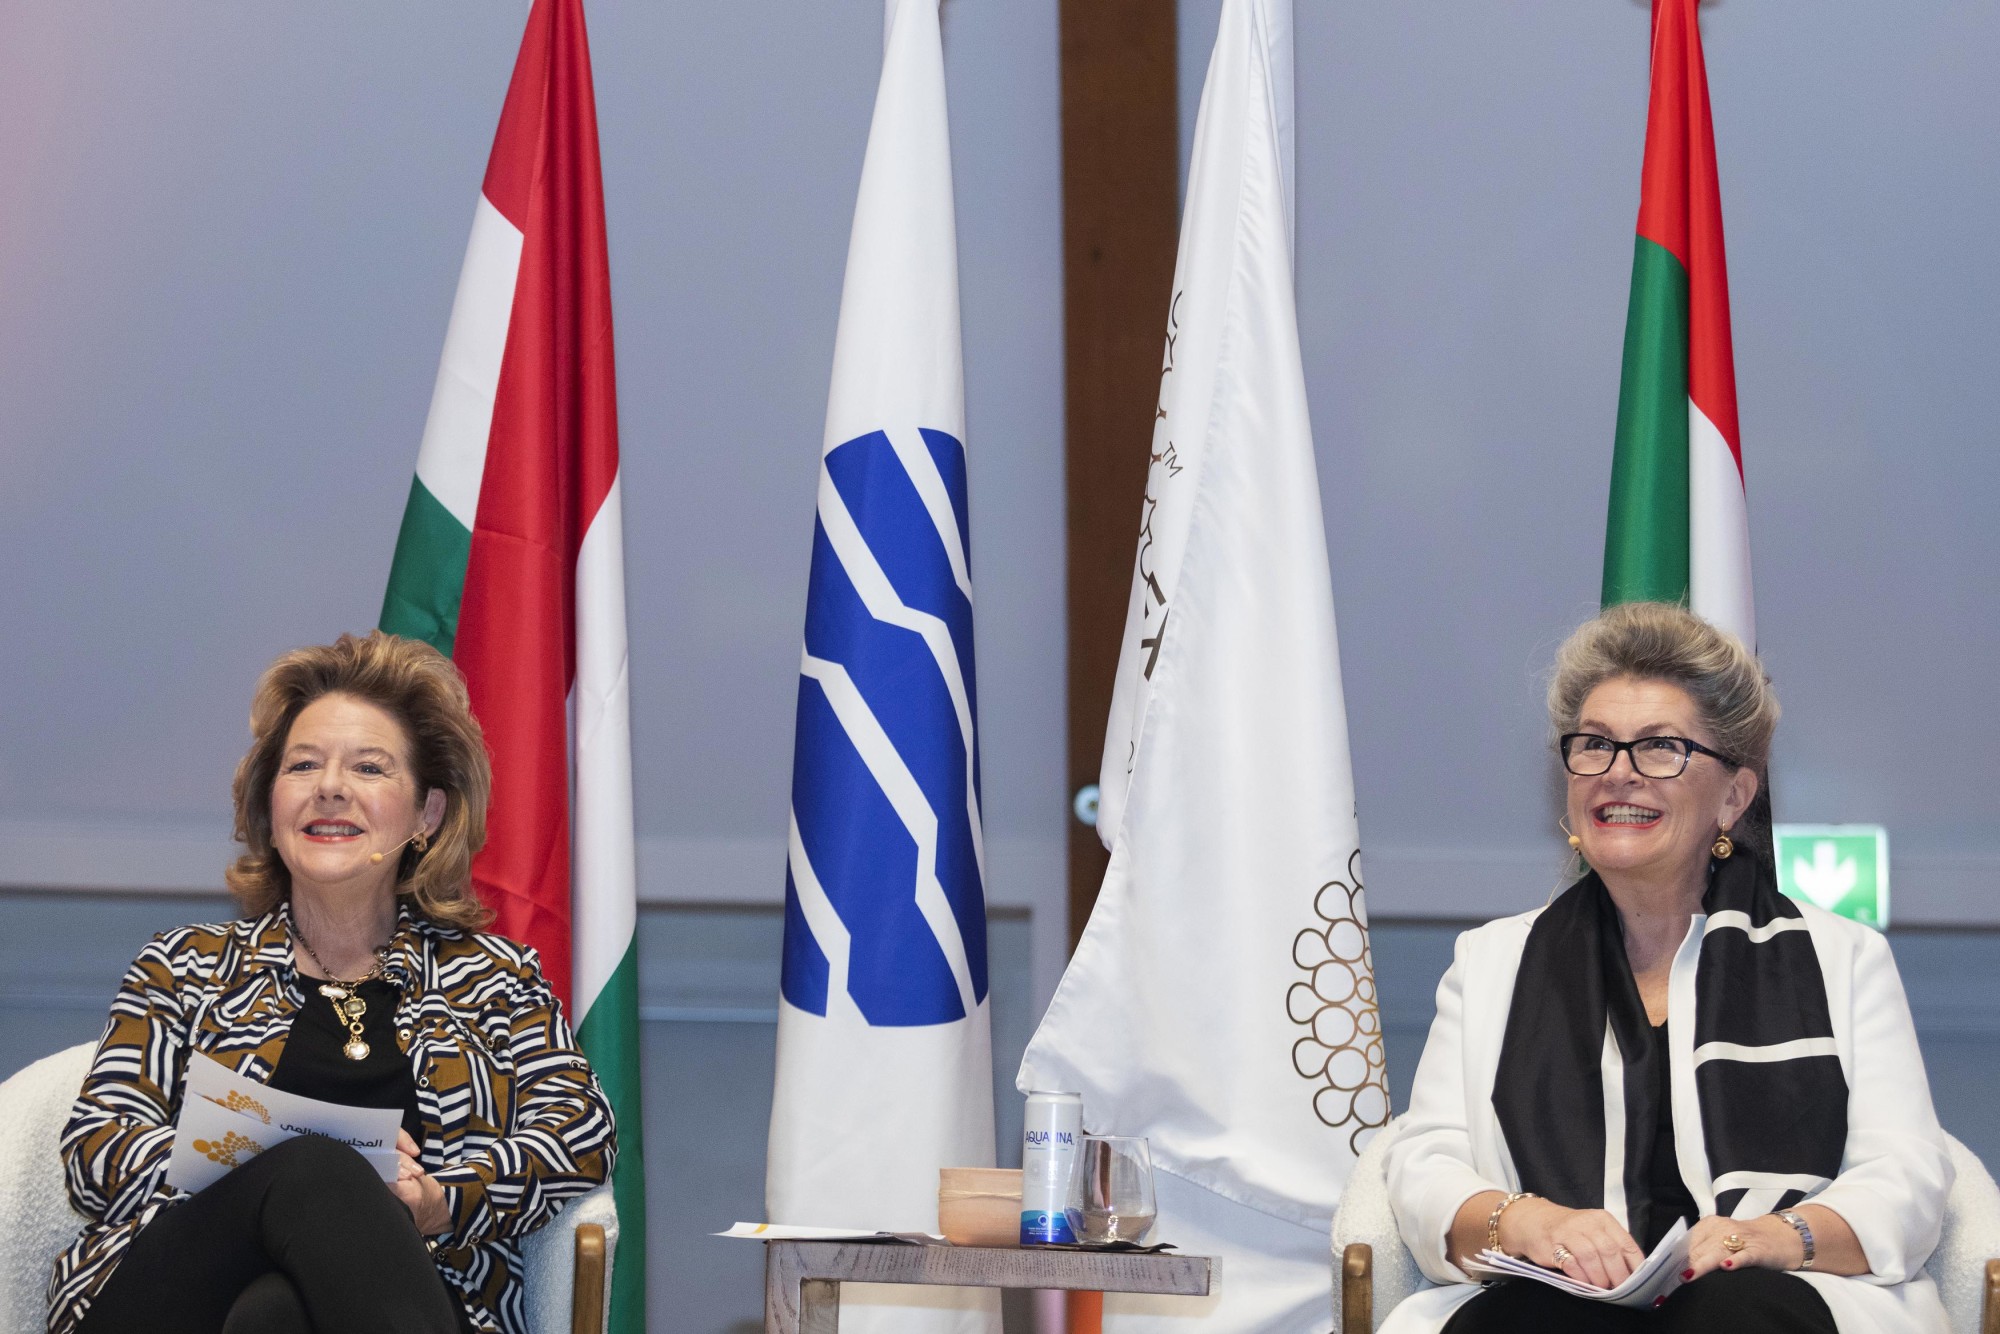 Her Excellency Katalin Annamária Bogyay, Permanent Representative of Hungary and Eithne Treanor, Conference Moderator during the World Majlis - Everyday (S)heroes In Collaboration with Hungary at the Hungary Pavilion m35256